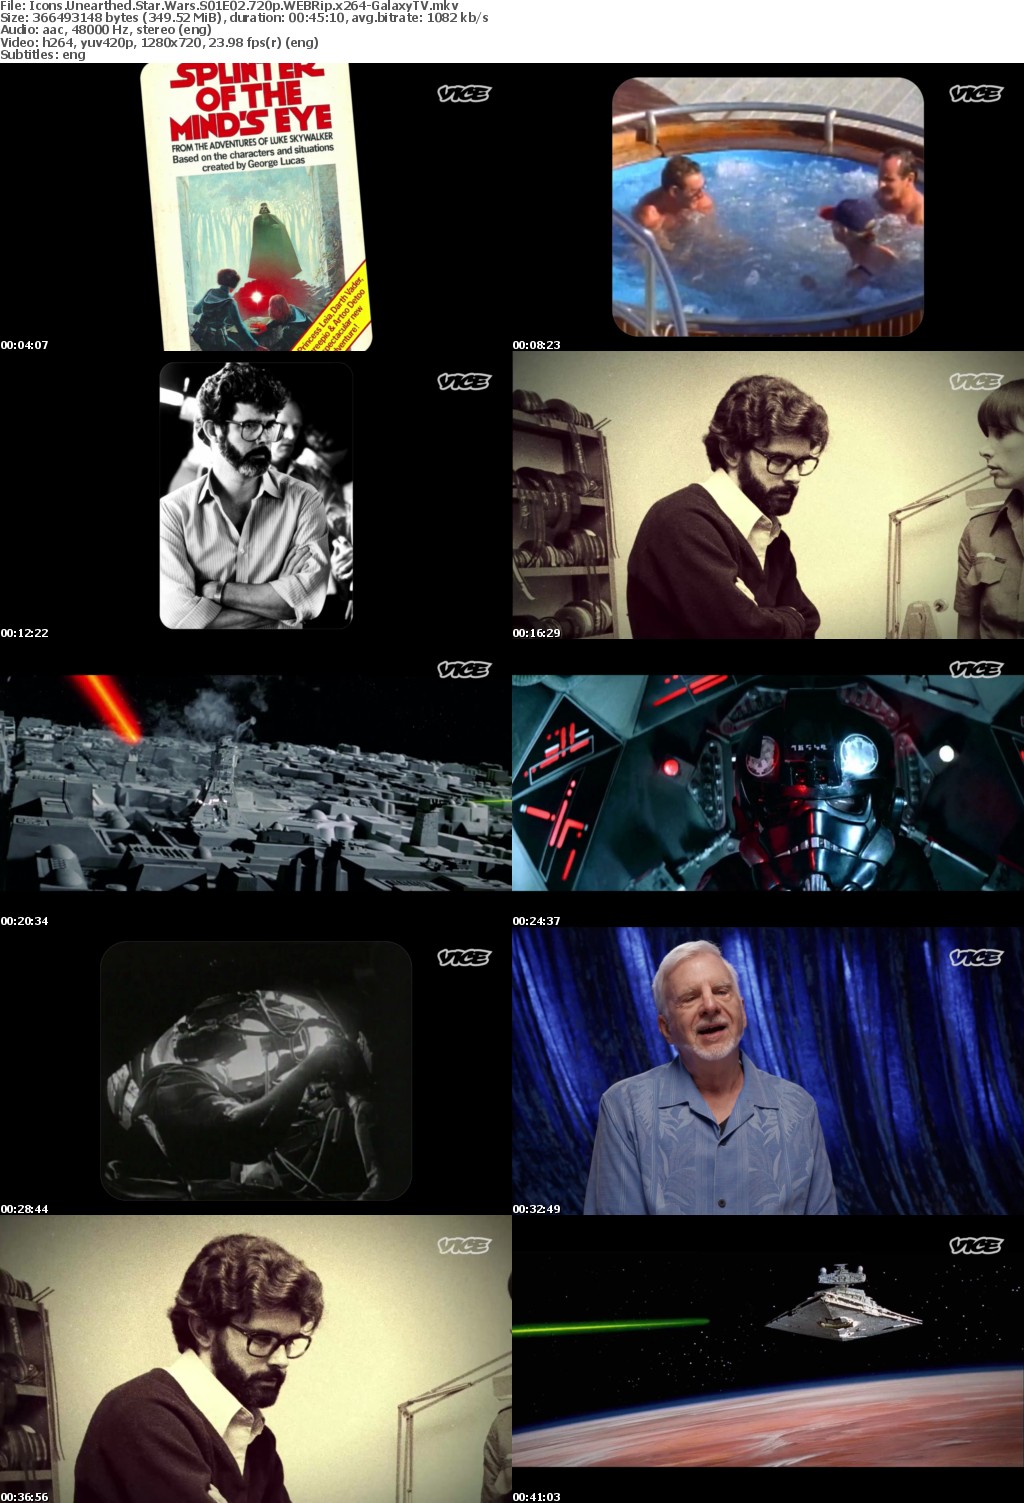 Icons Unearthed Star Wars S01 COMPLETE 720p WEBRip x264-GalaxyTV